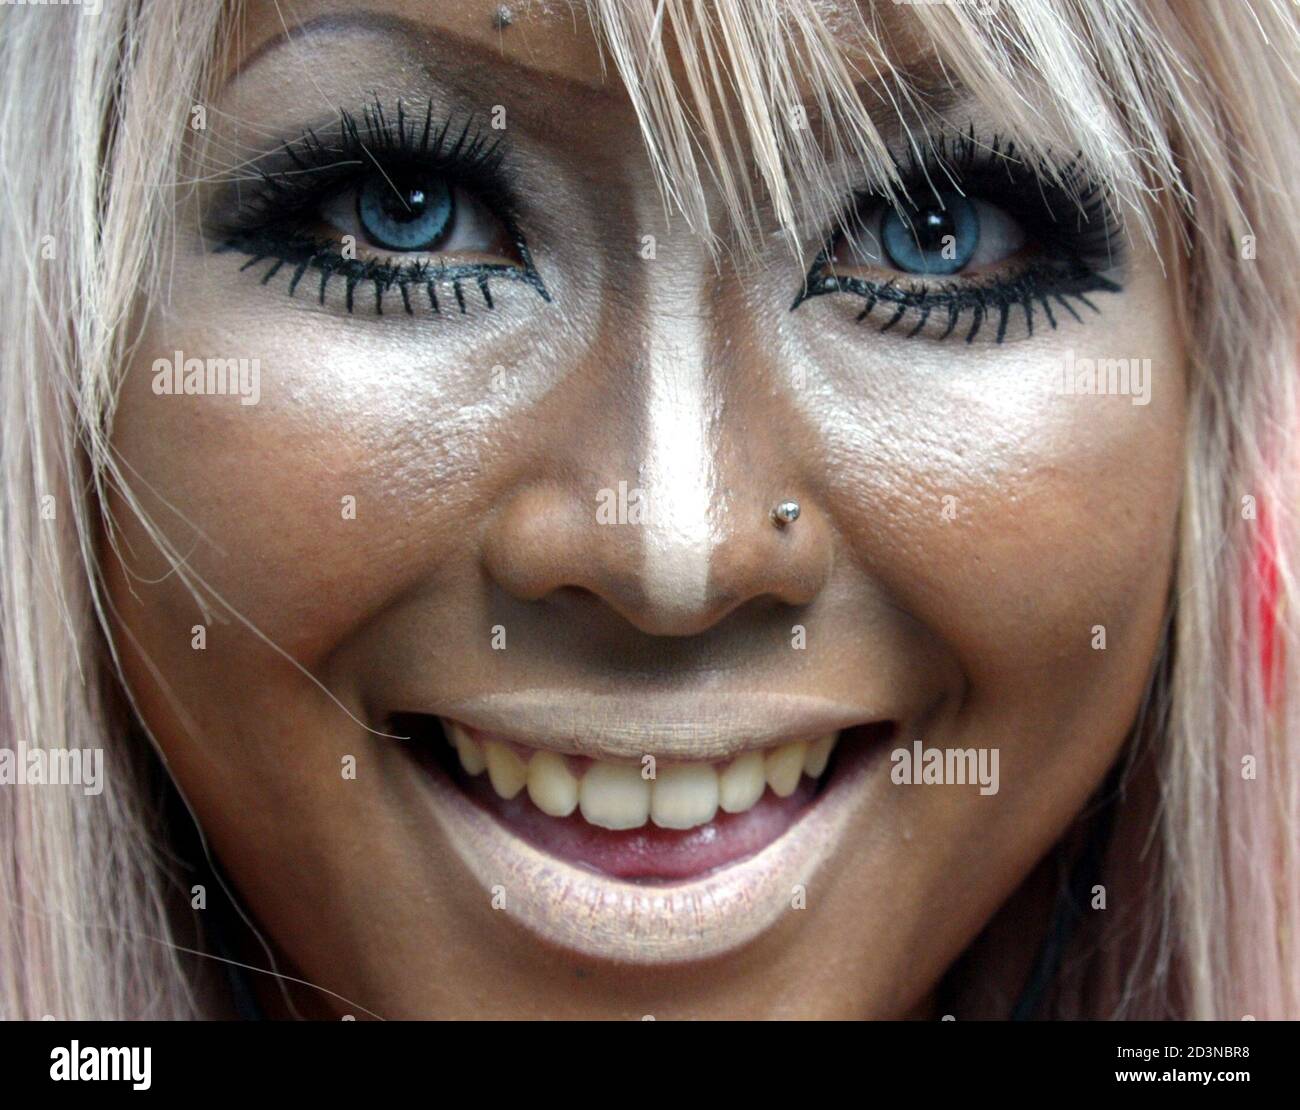 A fashionable "Shibuya girl" smiles in her blue contact lenses in Tokyo's  Shibuya district, popular among Japan's young people, May 4, 2004. "I'm  sweating from the moment I put on this makeup,"